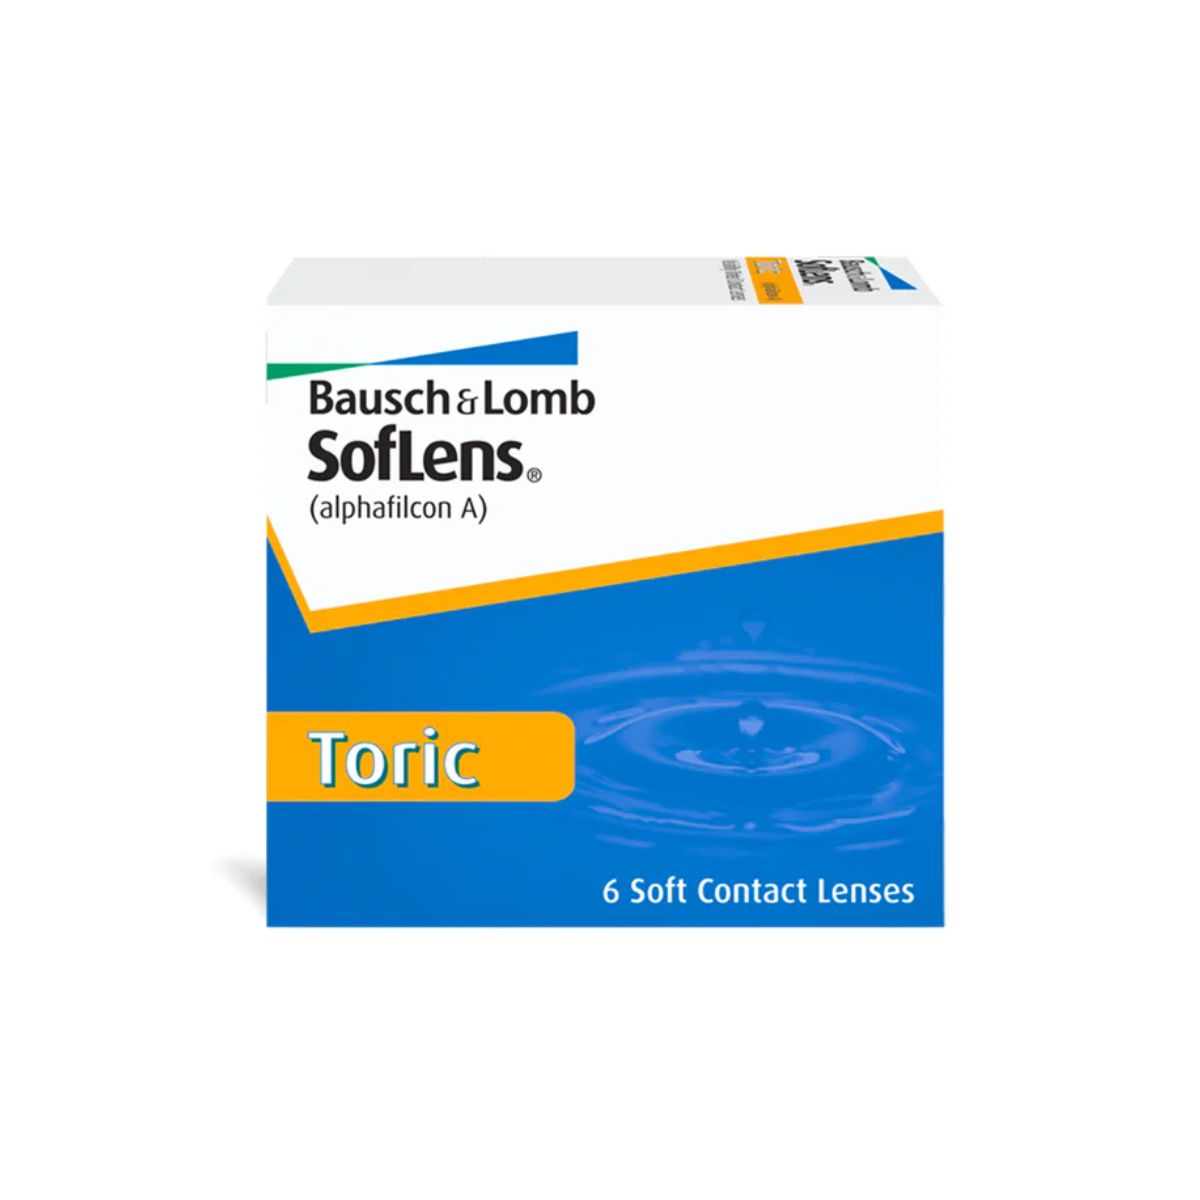 "SofLens Toric Monthly Disposable for Astigmatism (6 Lens Pack) optorium"